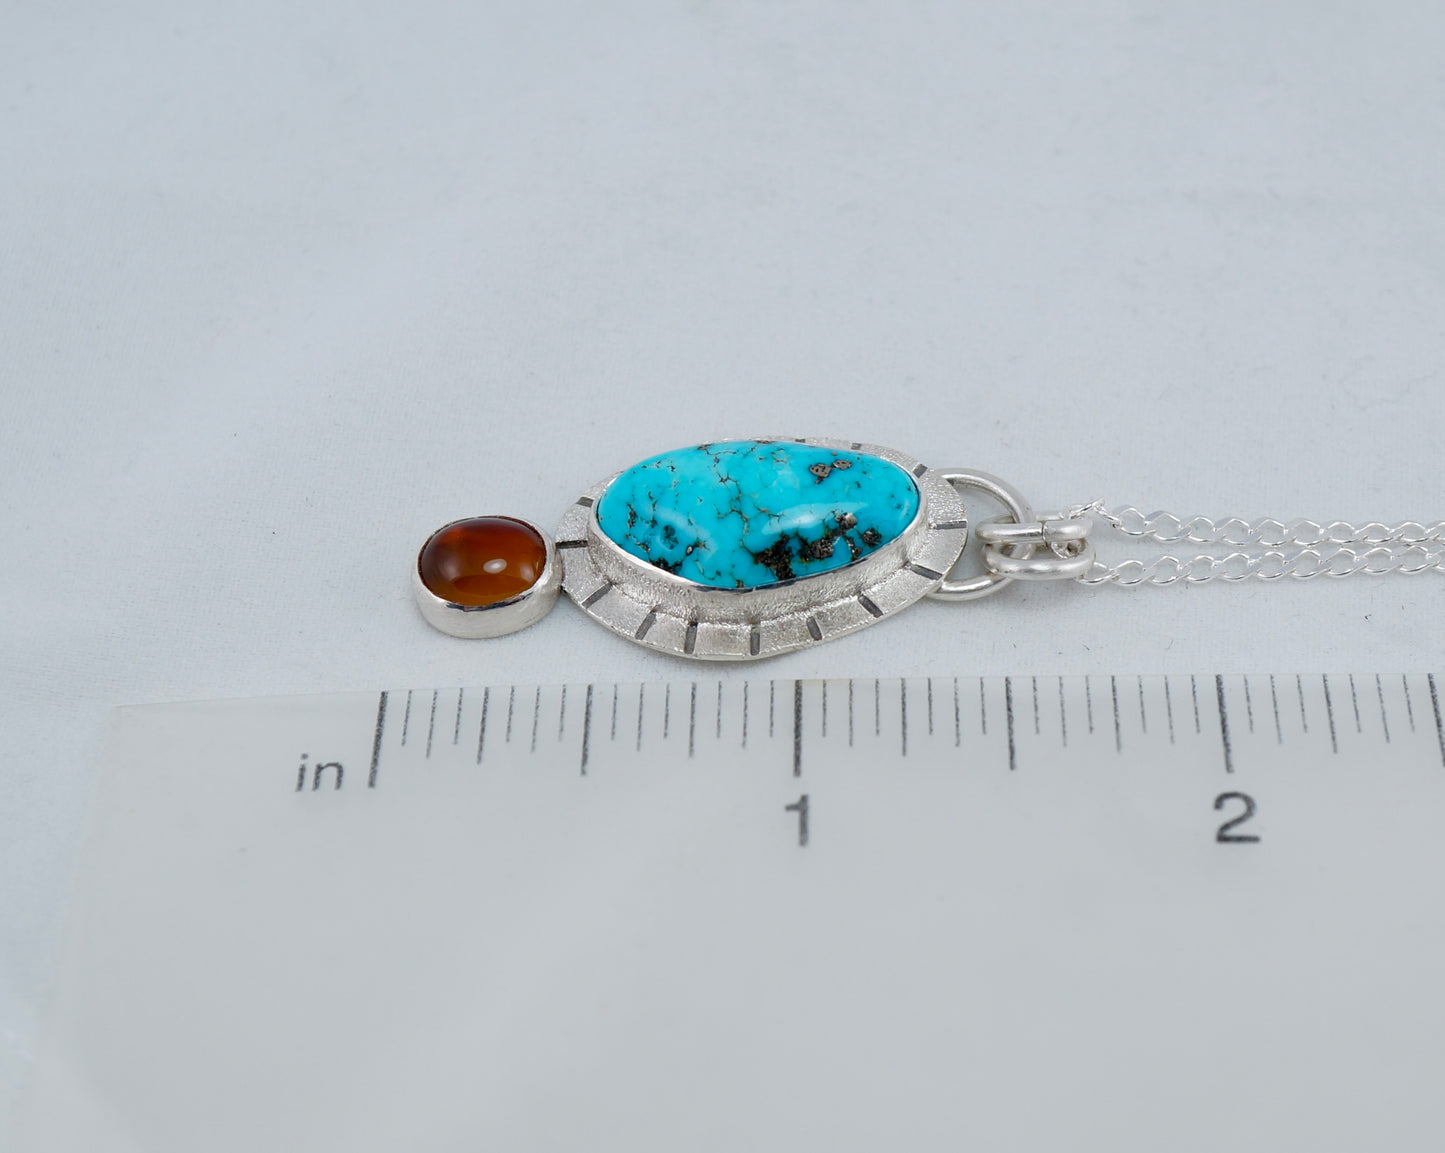 Turquoise and Montana Agate Necklace